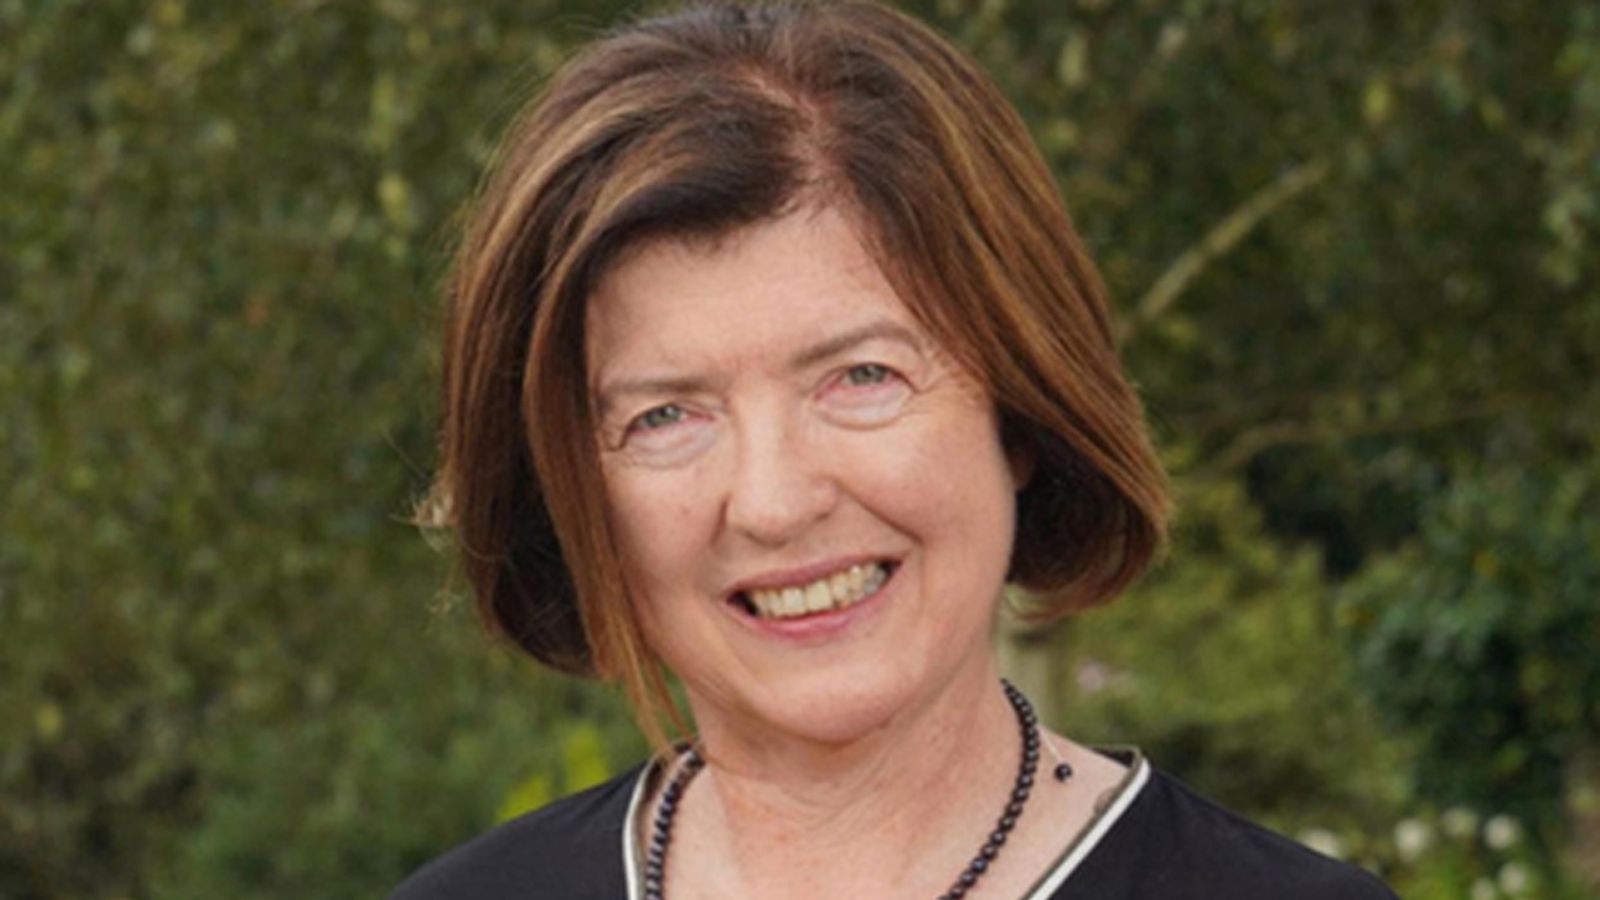 Labour leader Sir Keir Starmer appoints partygate investigator Sue Gray as new chief of staff